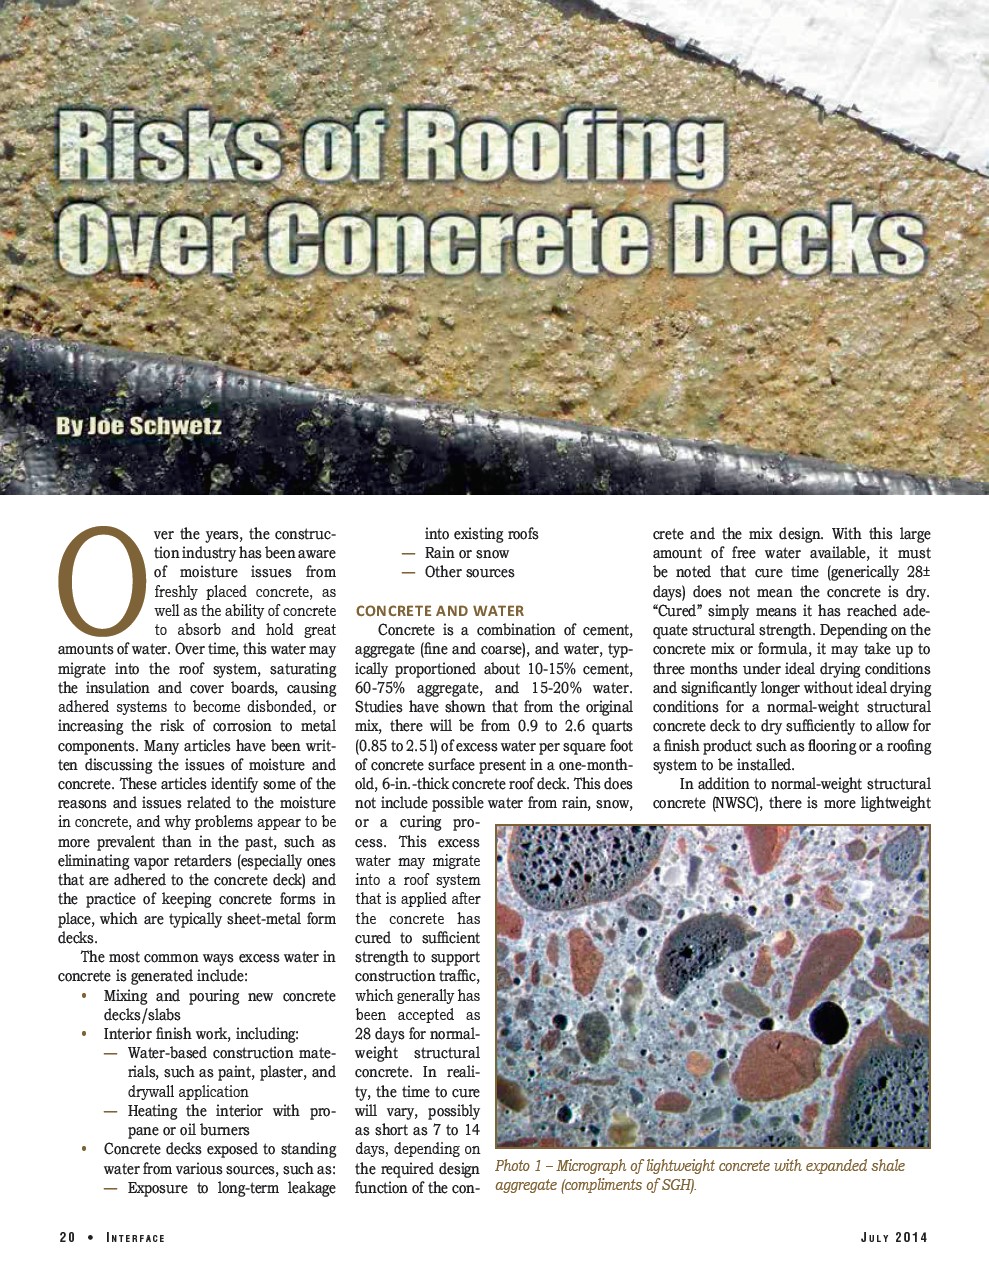 Risks of roofing over concrete